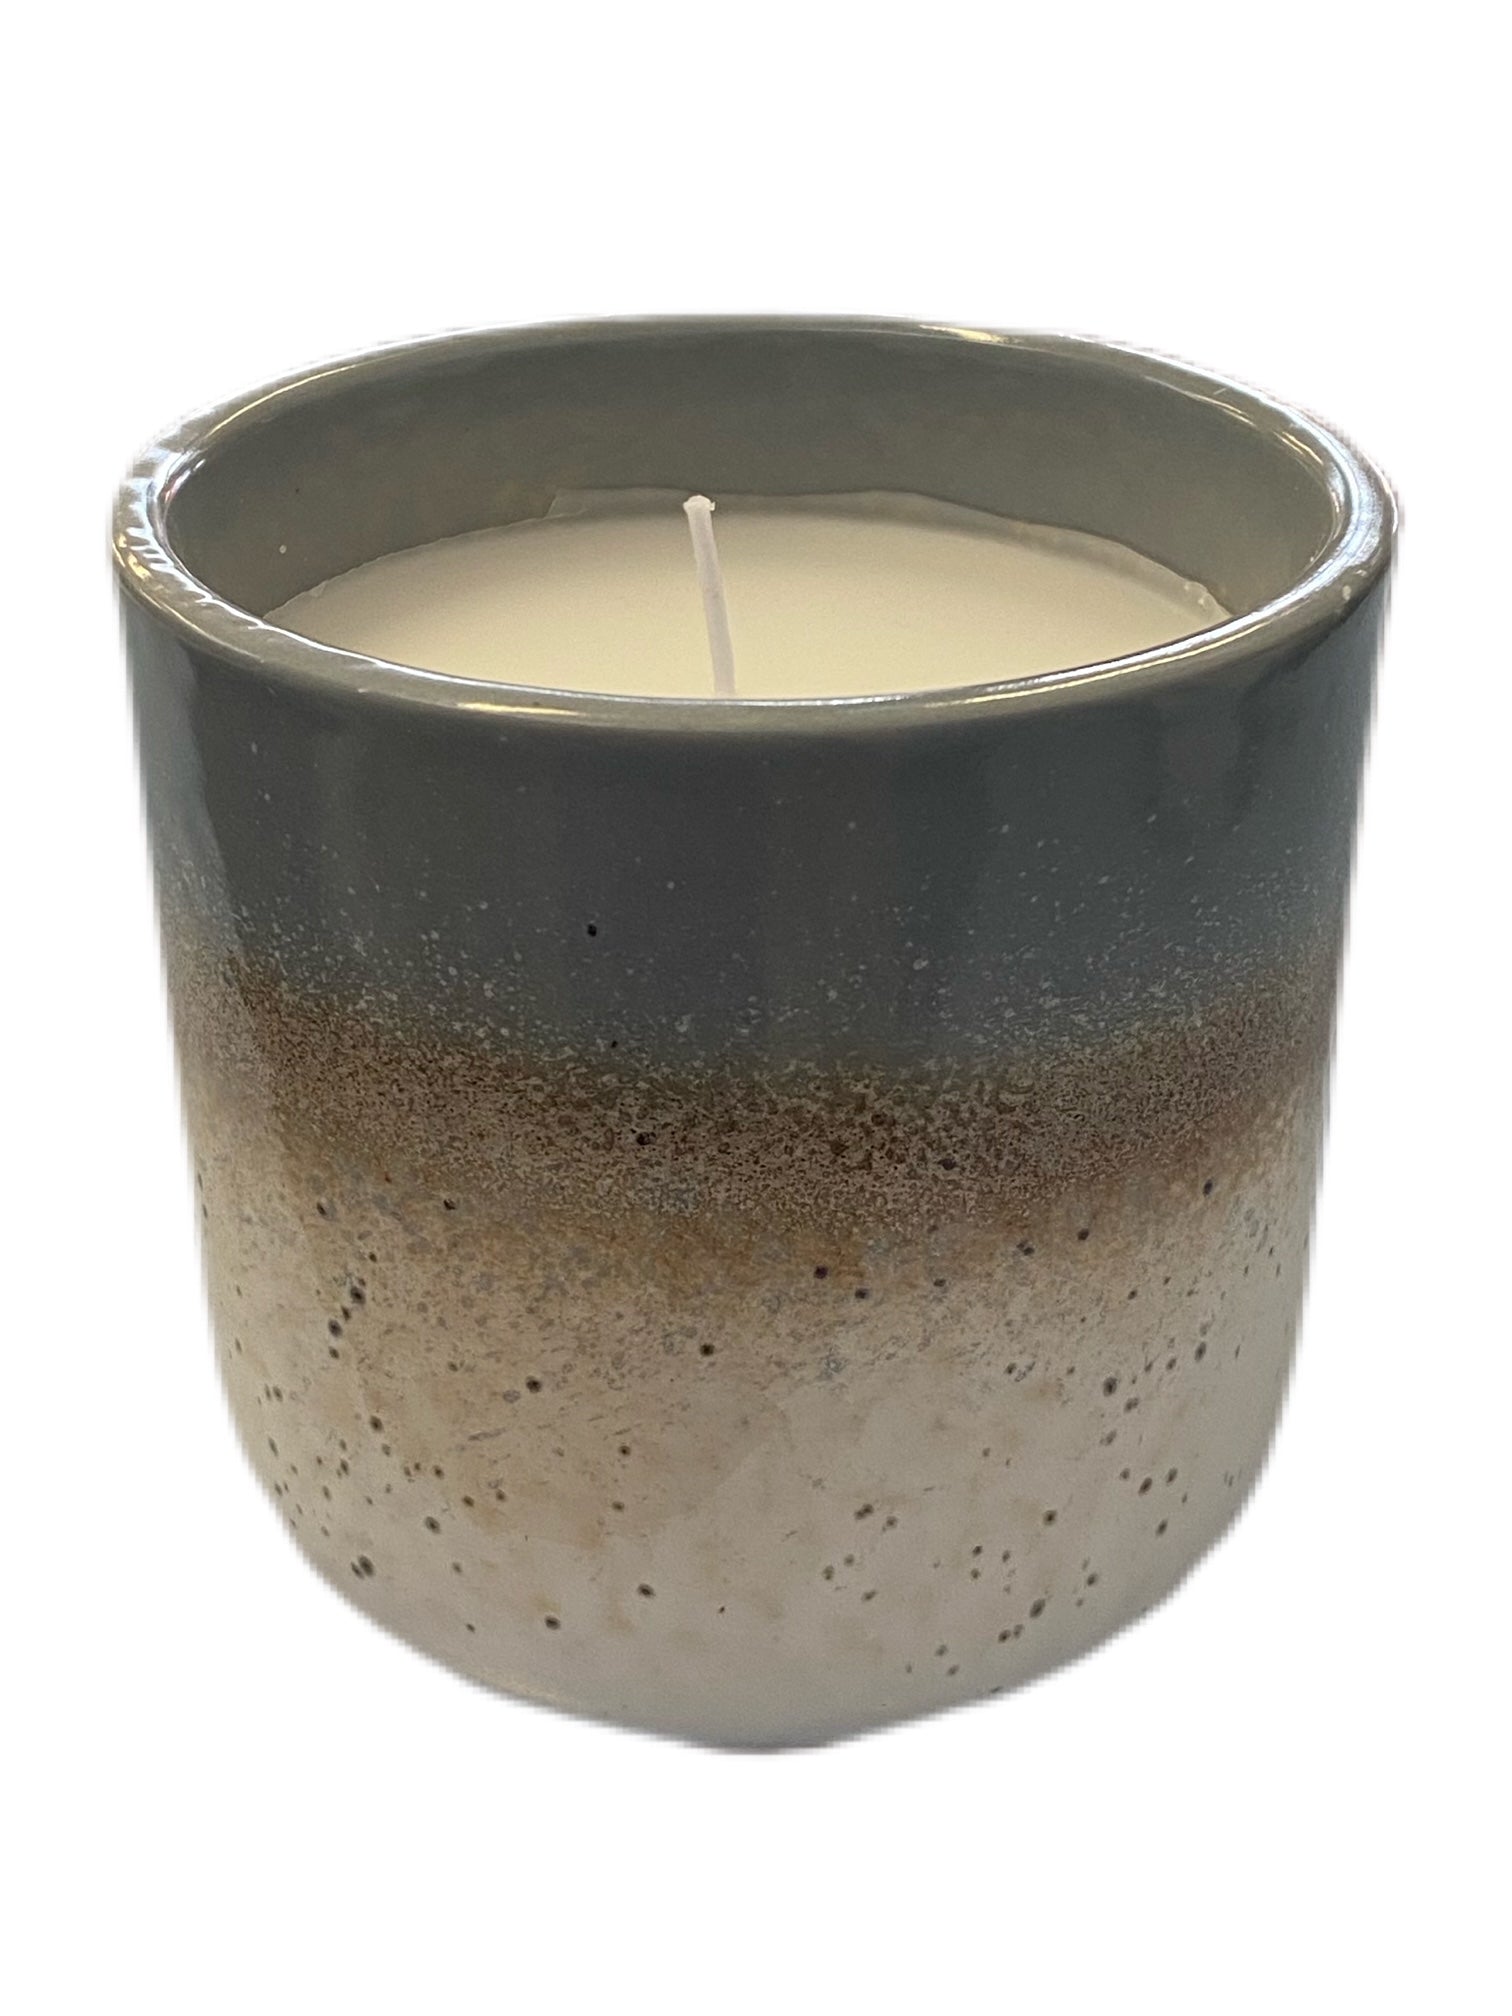 Ombre Glazed Ceramic Candle Pot - Grey, Blue or Terracotta - The Cooks Cupboard Ltd